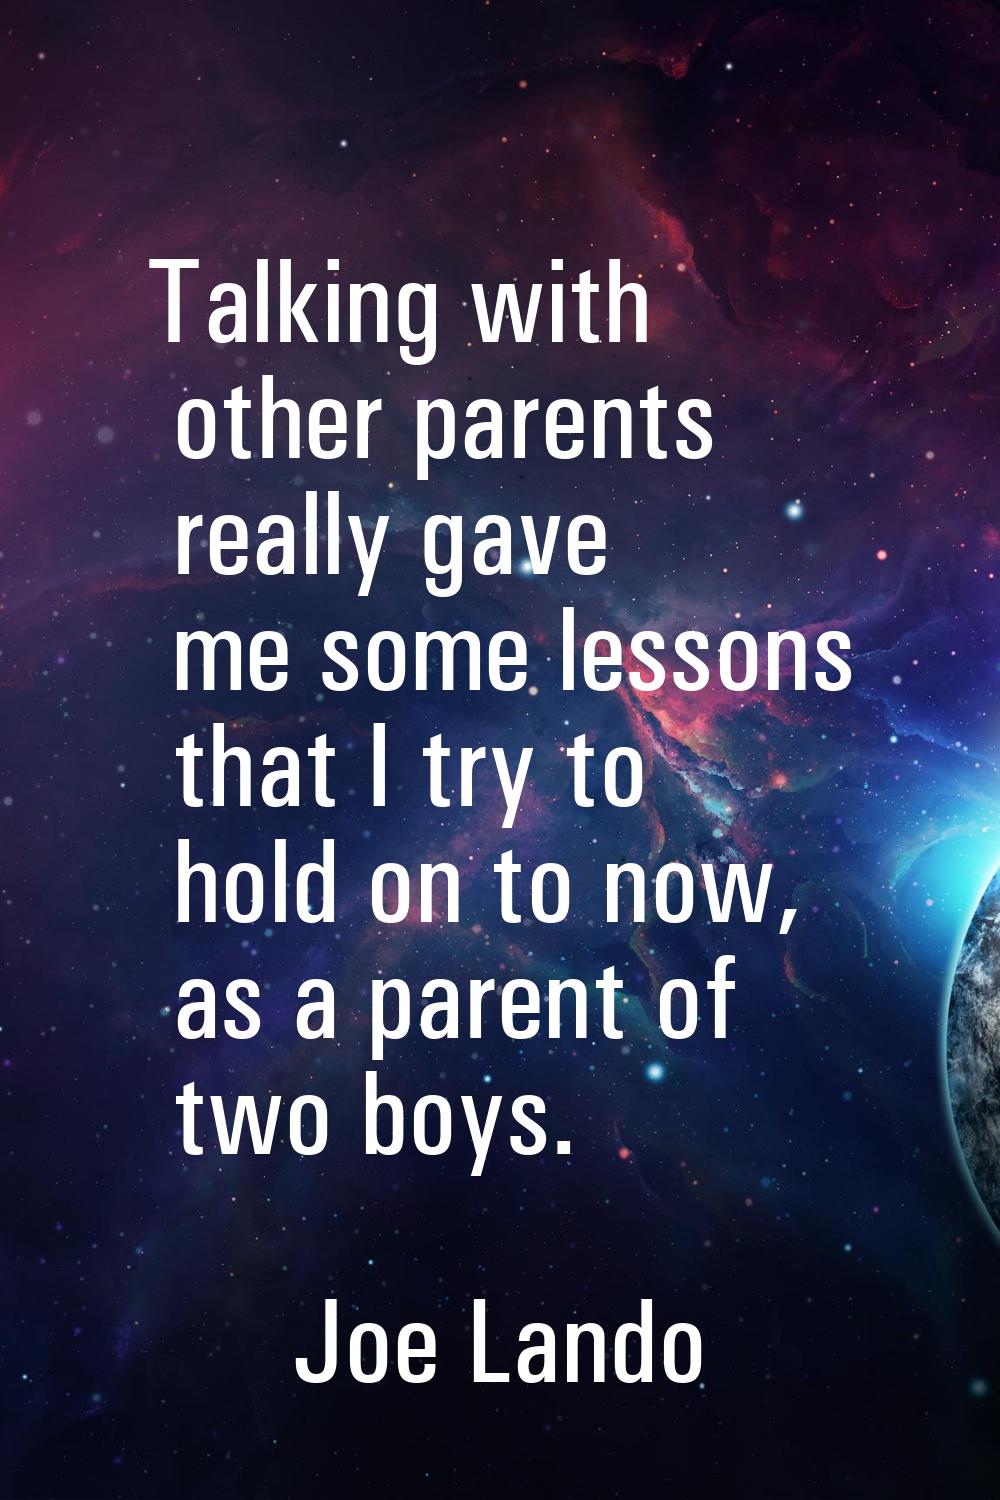 Talking with other parents really gave me some lessons that I try to hold on to now, as a parent of